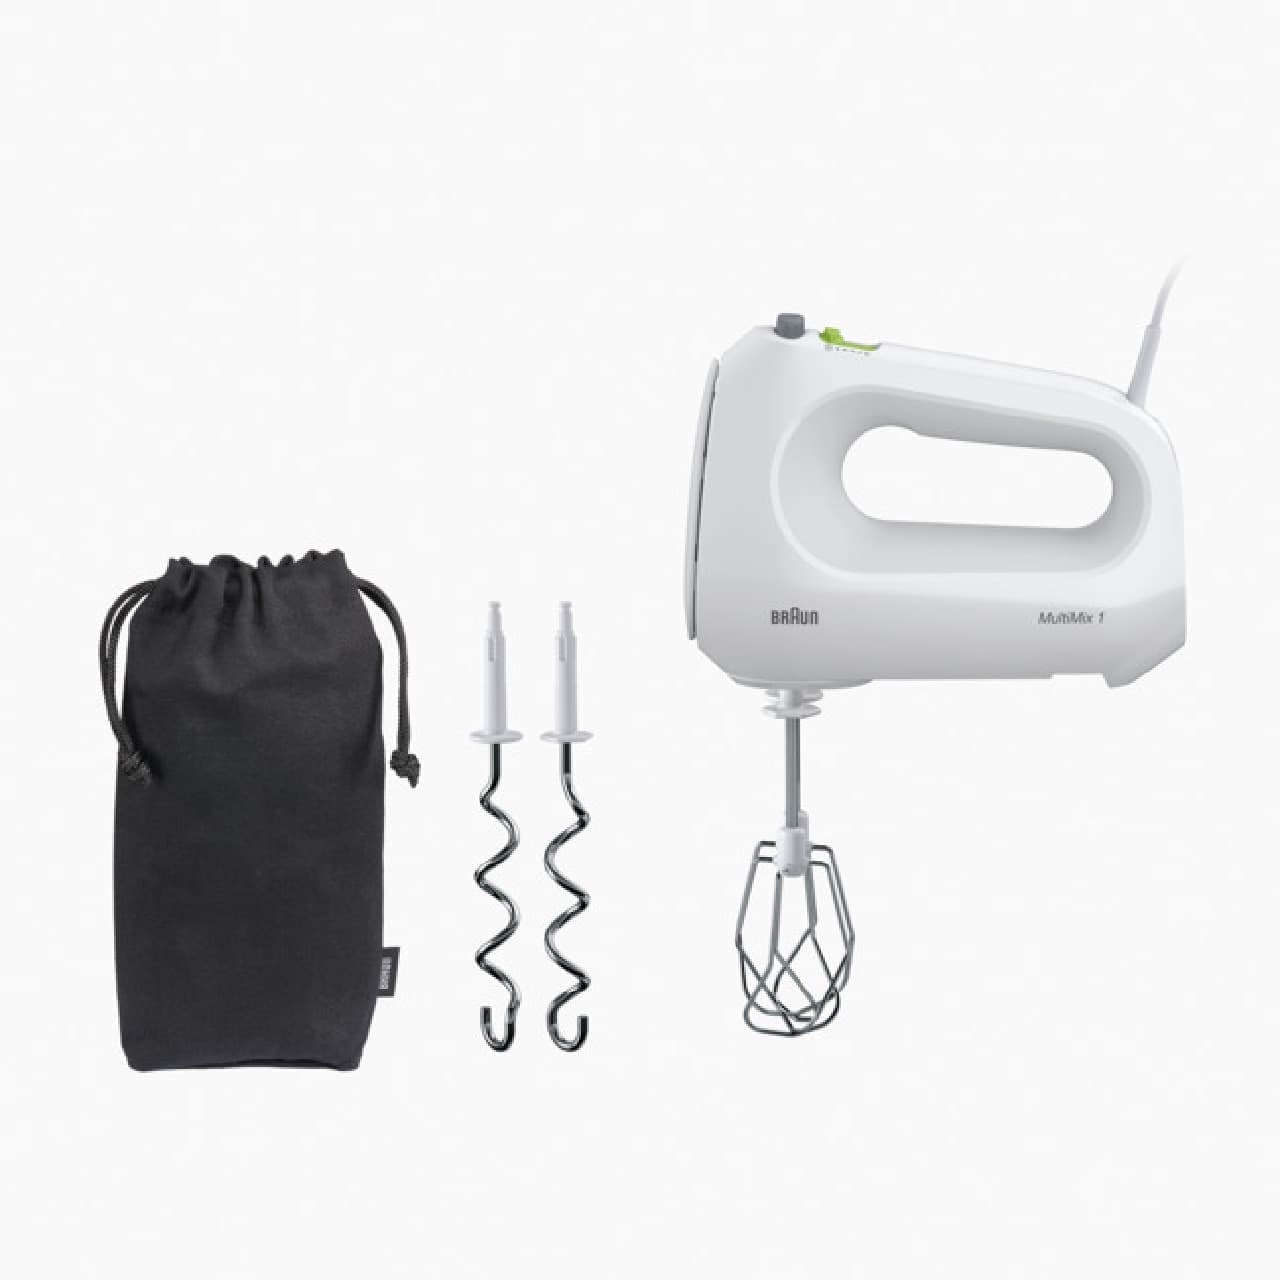 Introducing "Brown Multimix 1 Hand Mixer HM1010WH" --For making meringue and bread! Powerful & compact